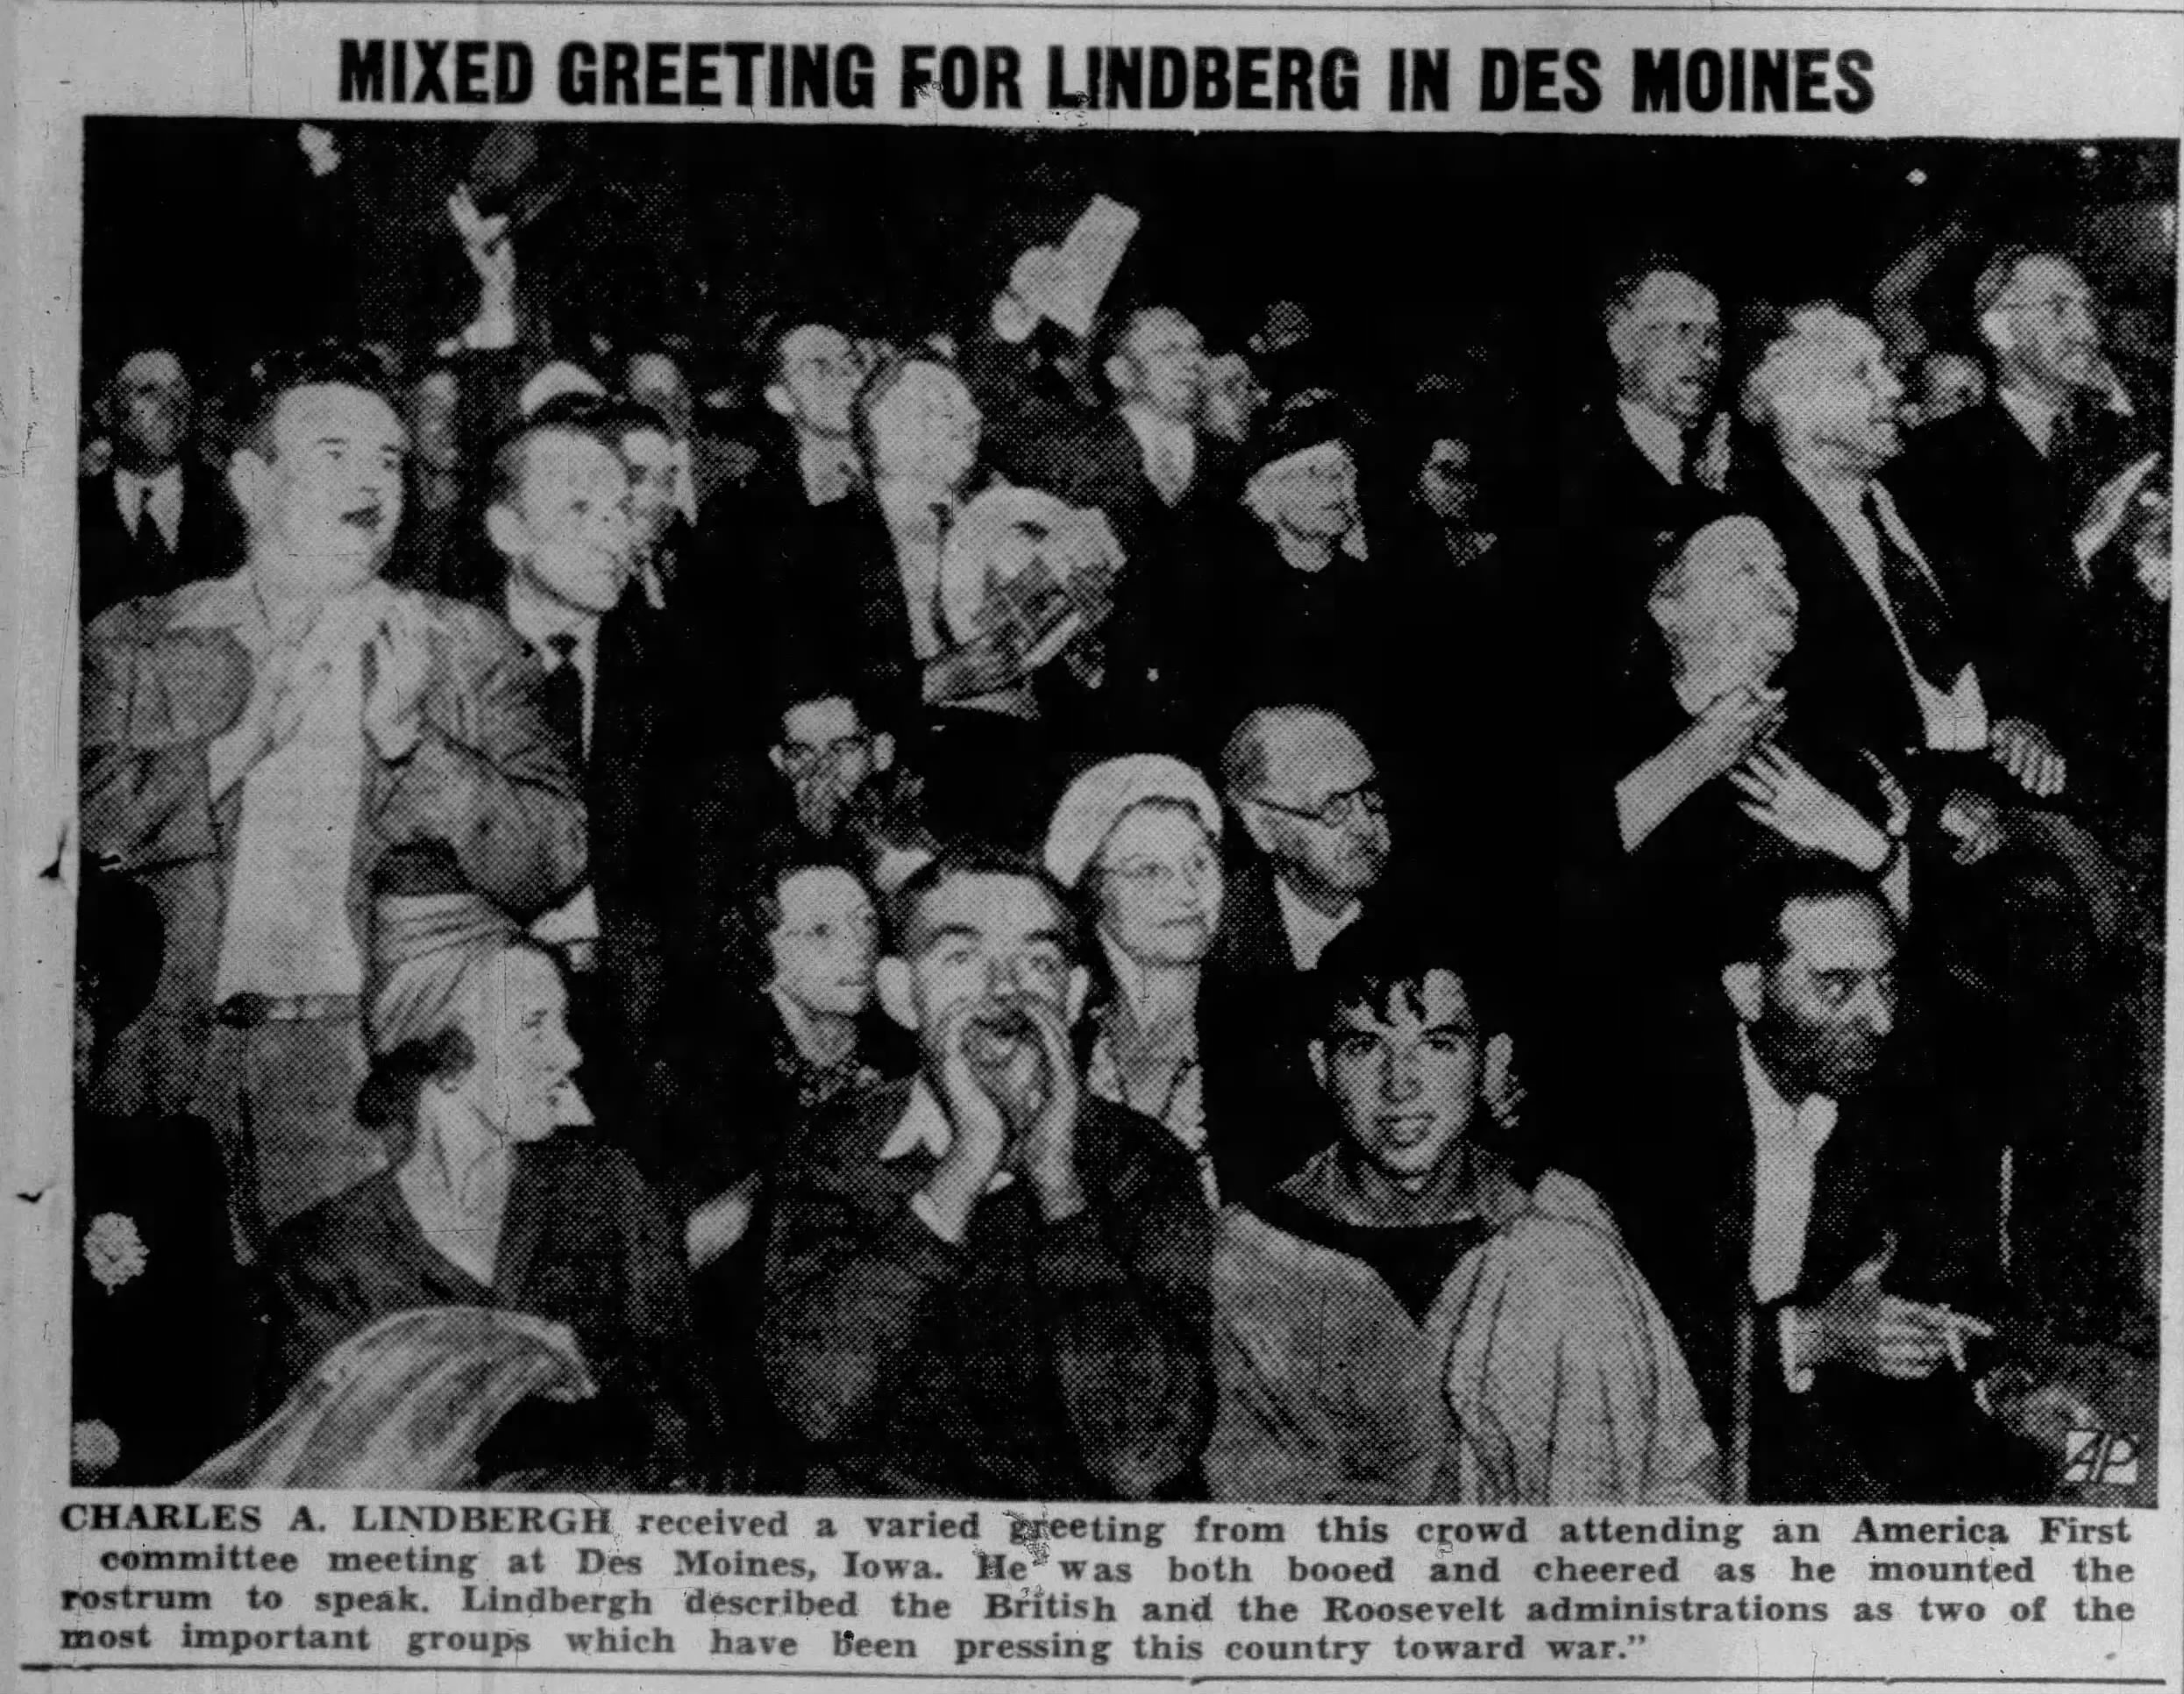 Mixed Greeting For Lindberg [sic] In Des Moines